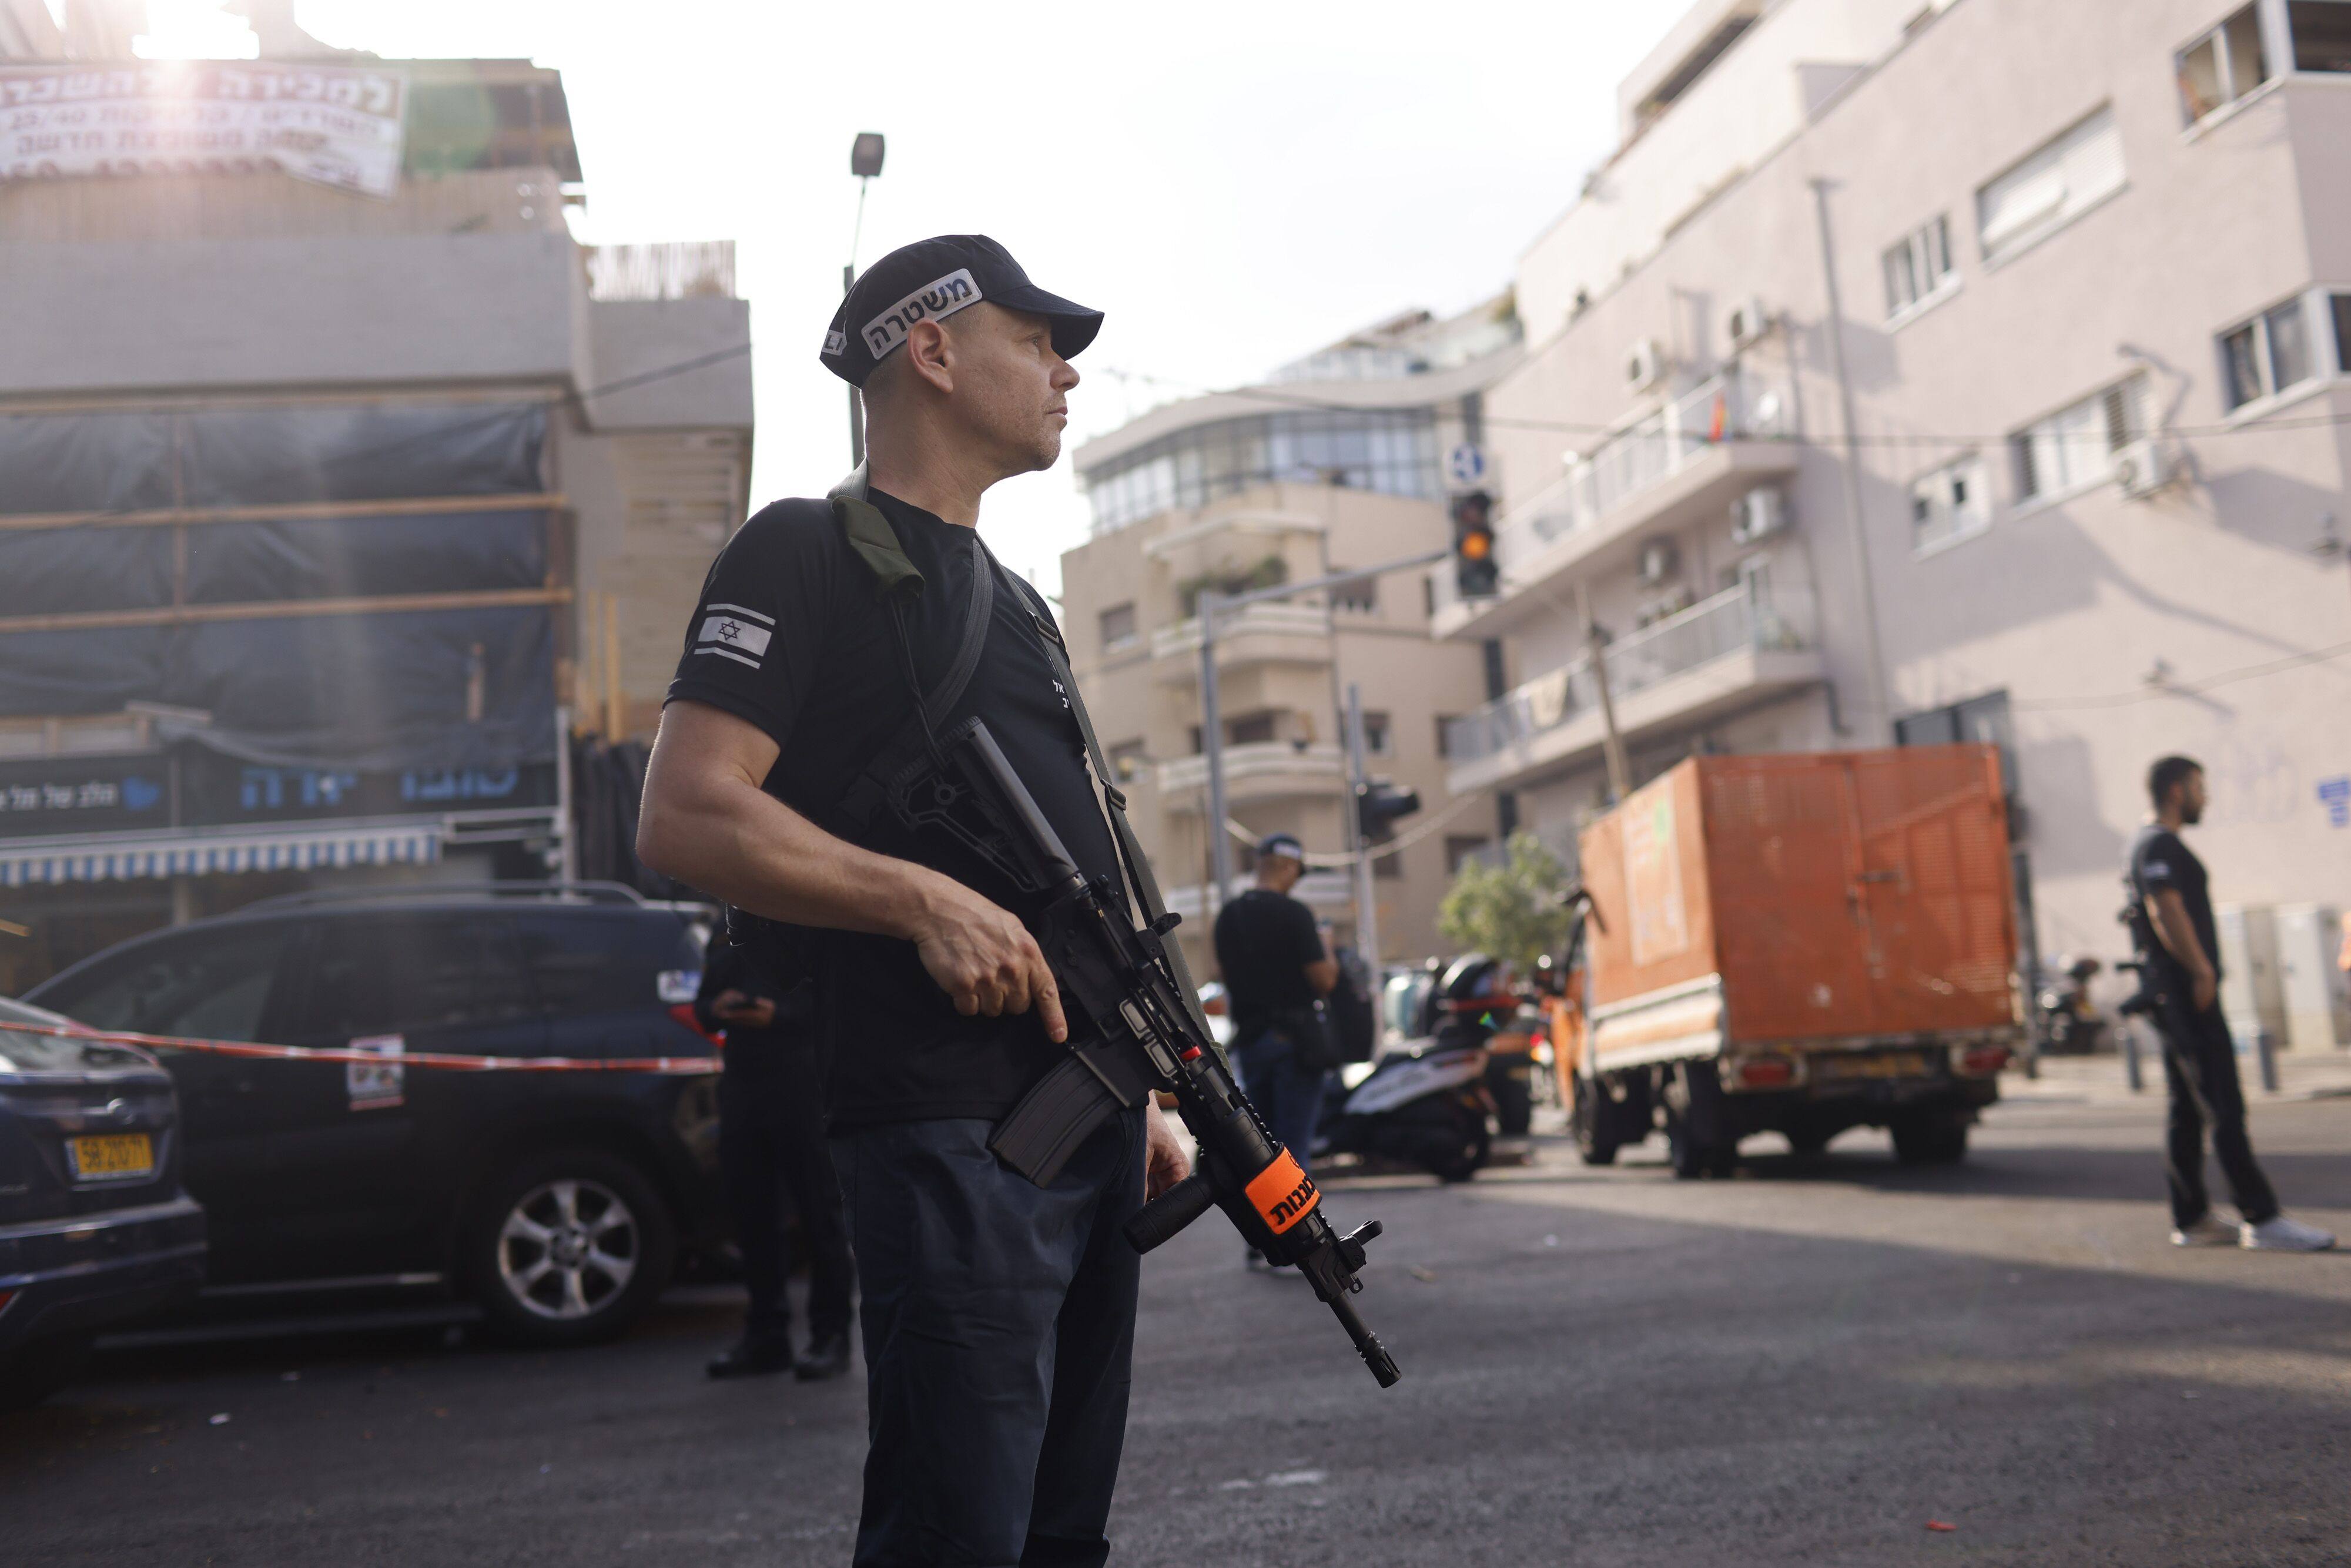 Israeli security forces stand guard after a drone strike near the US embassy in Tel Aviv that killed a man. Photo: Bloomberg